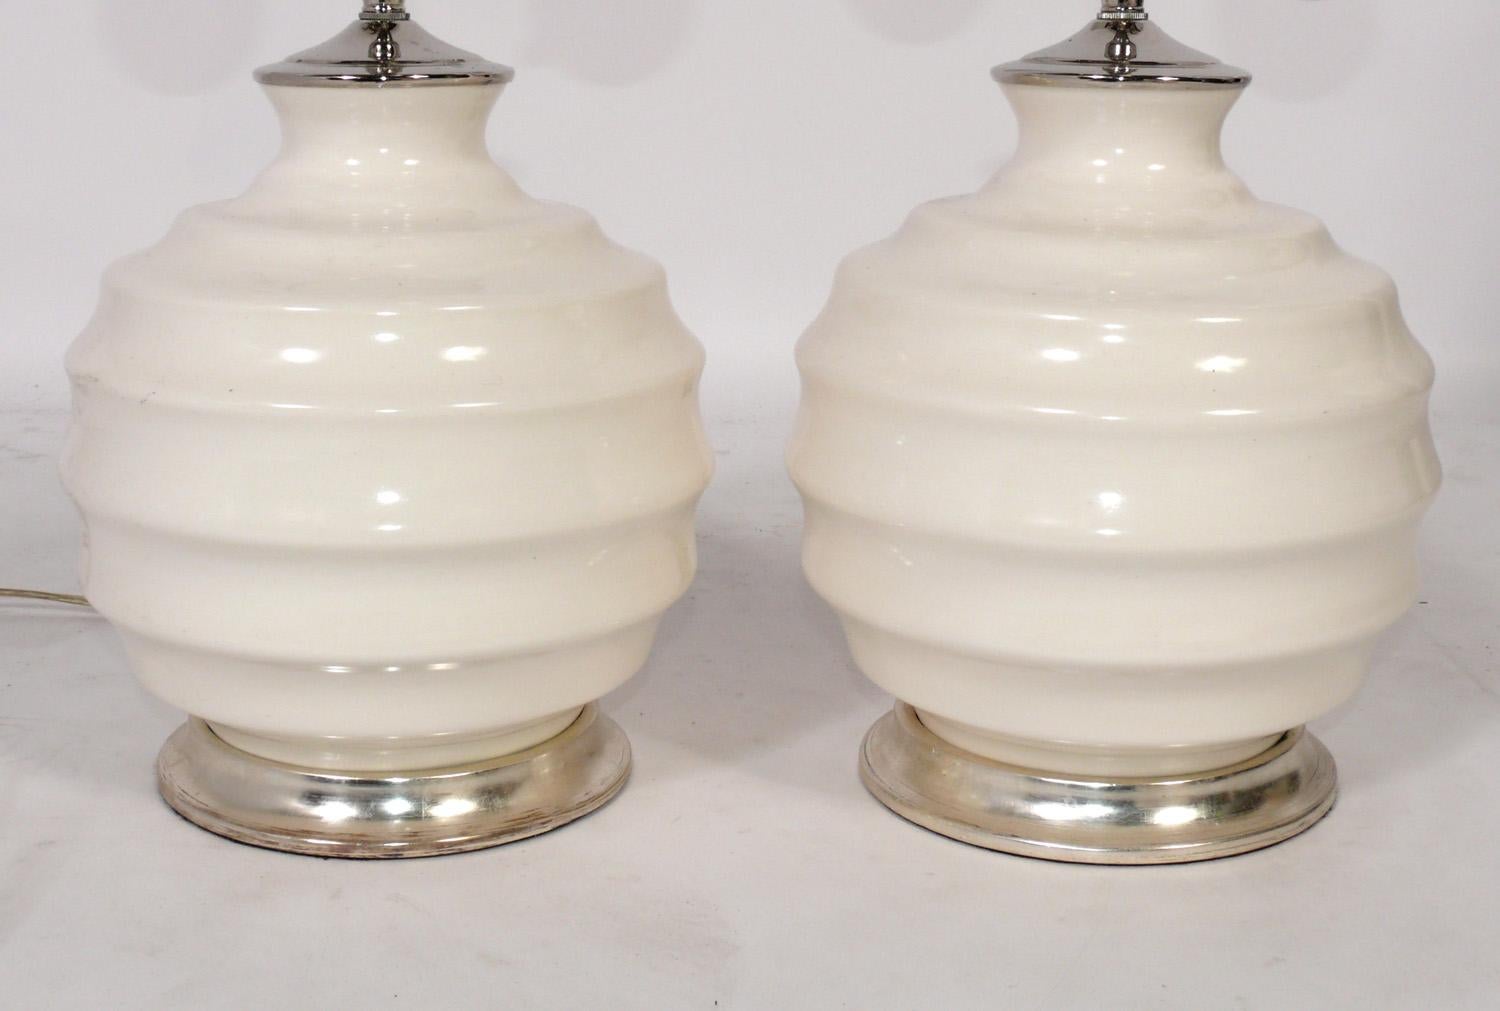 Pair of Petite Hand Thrown Ceramic Ribbed Ball Lamps in White Glaze, by Christopher Spitzmiller, New York City, New York, American, circa 2000s. Signed with Spitzmiller label to one lamp, see last photo. These were recently removed from the famous